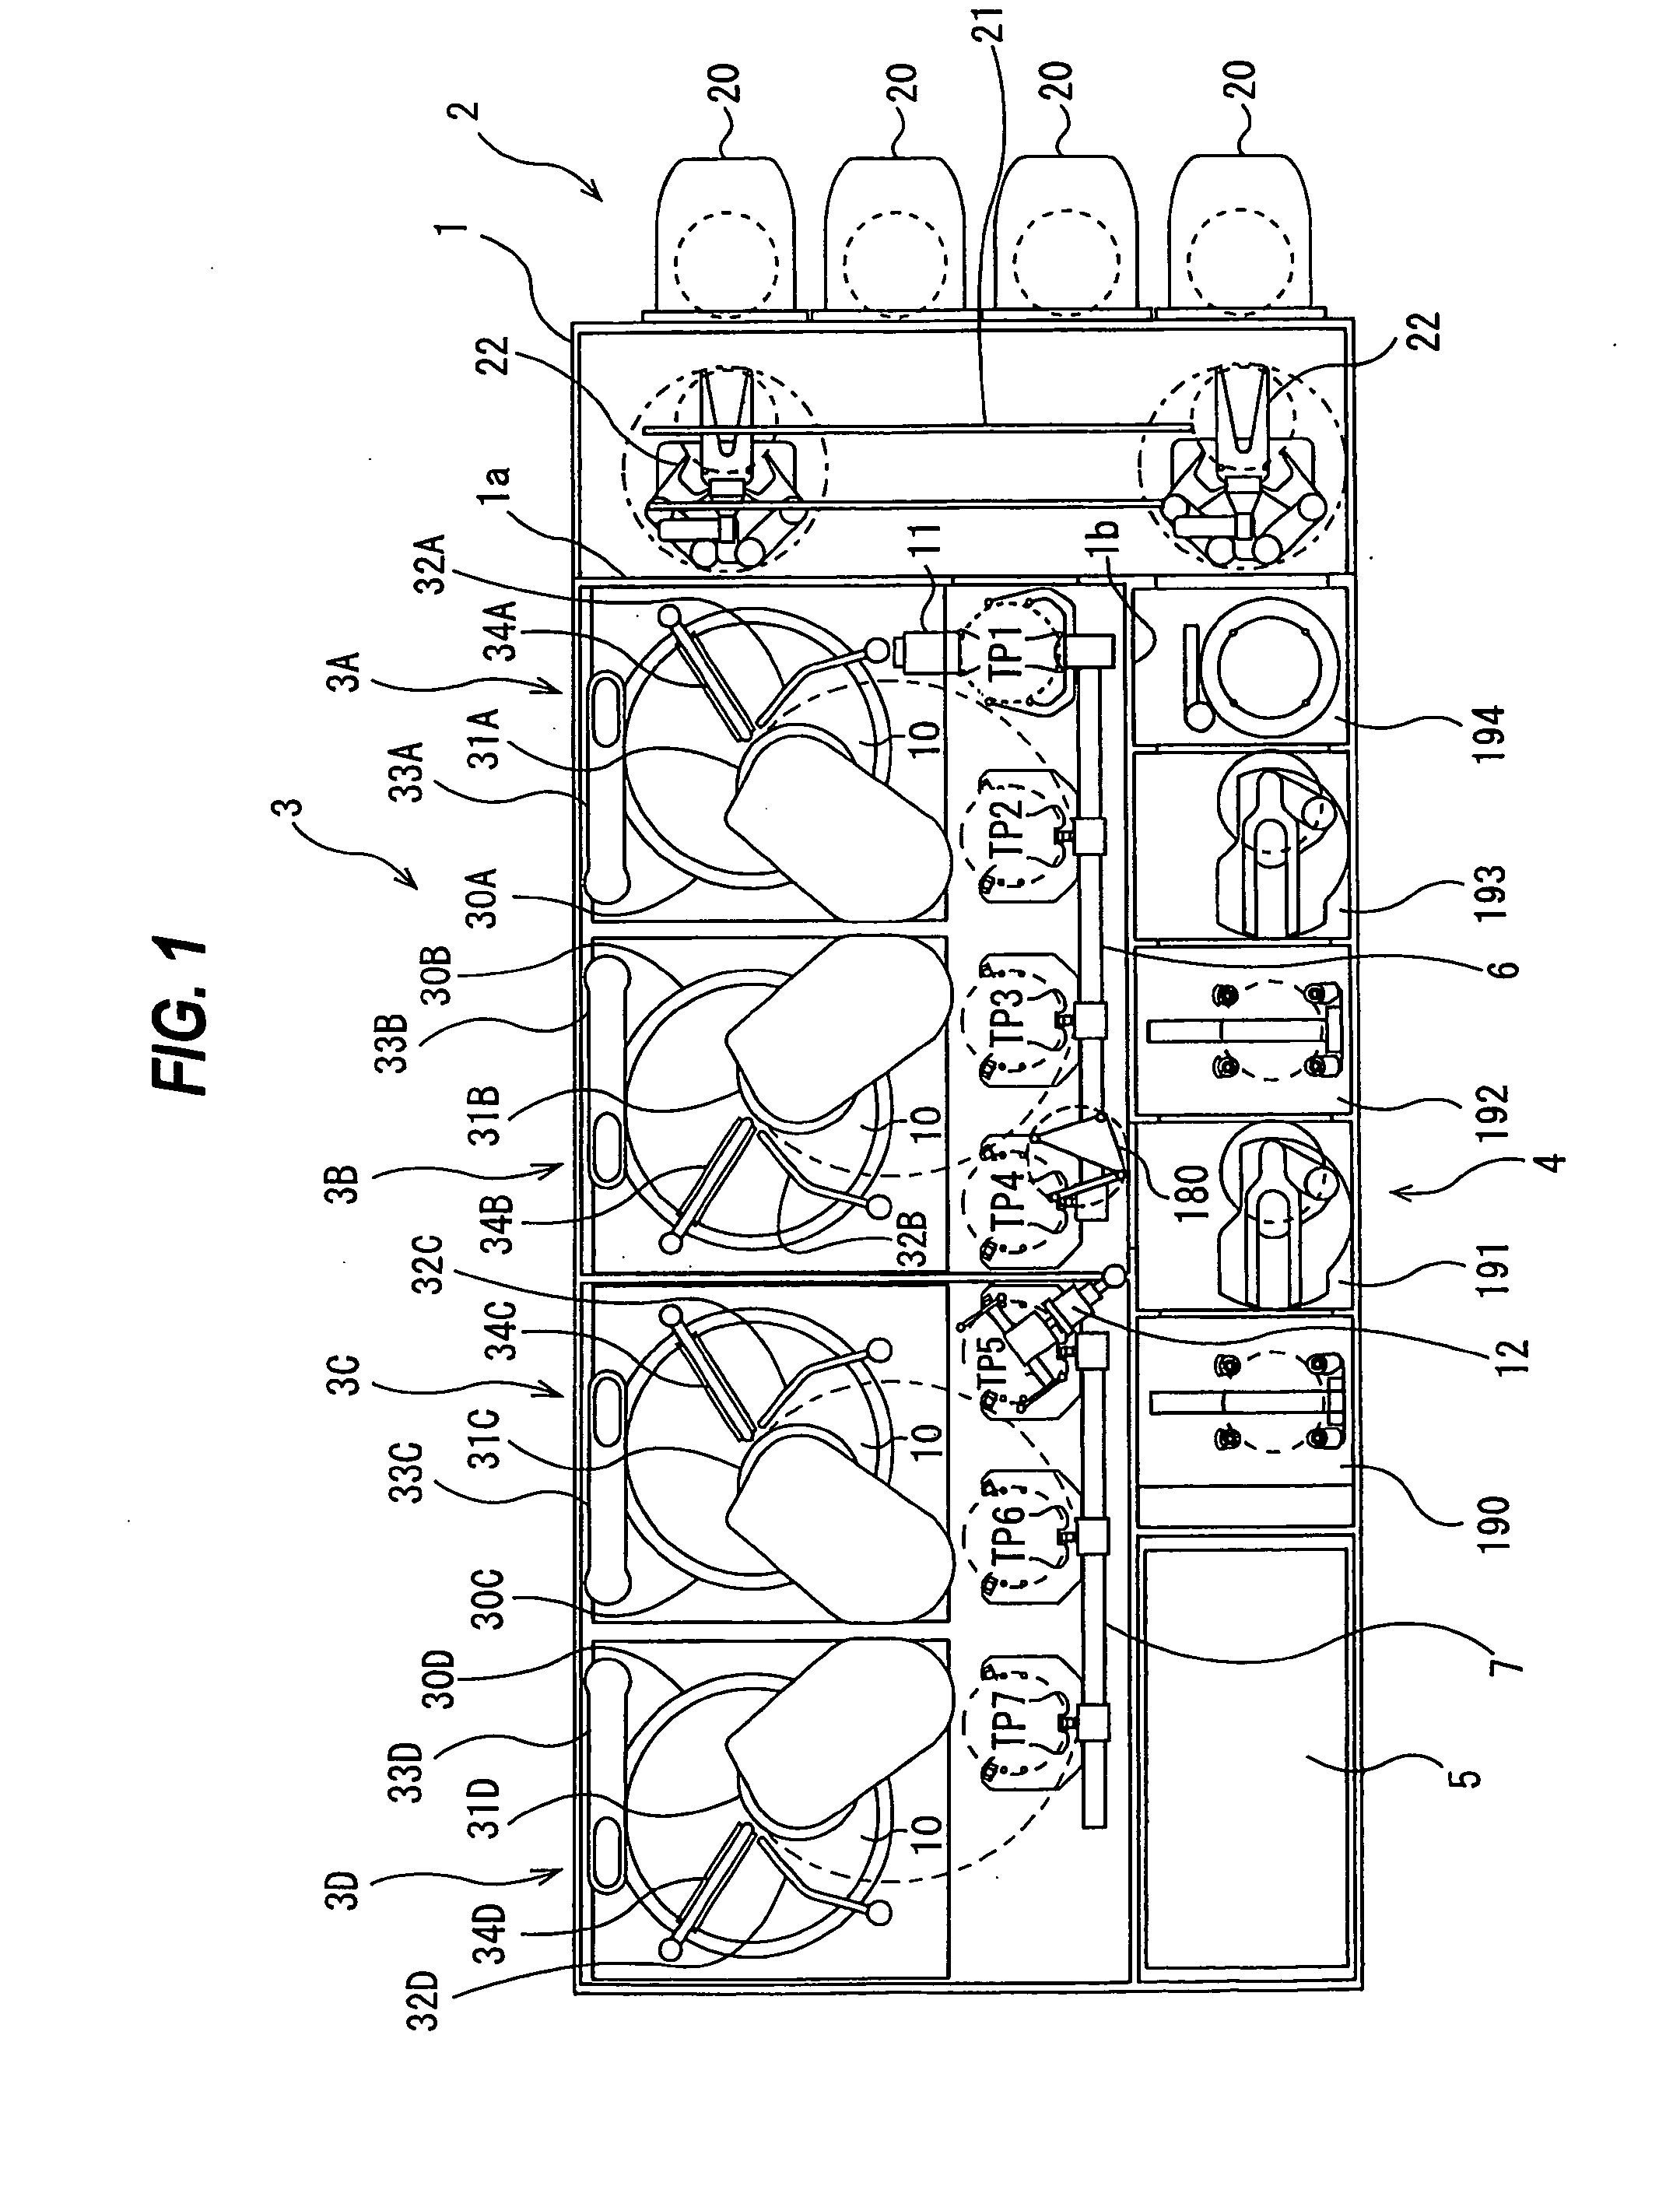 Substrate processing apparatus, substrate processing method, substrate holding mechanism, and substrate holding method